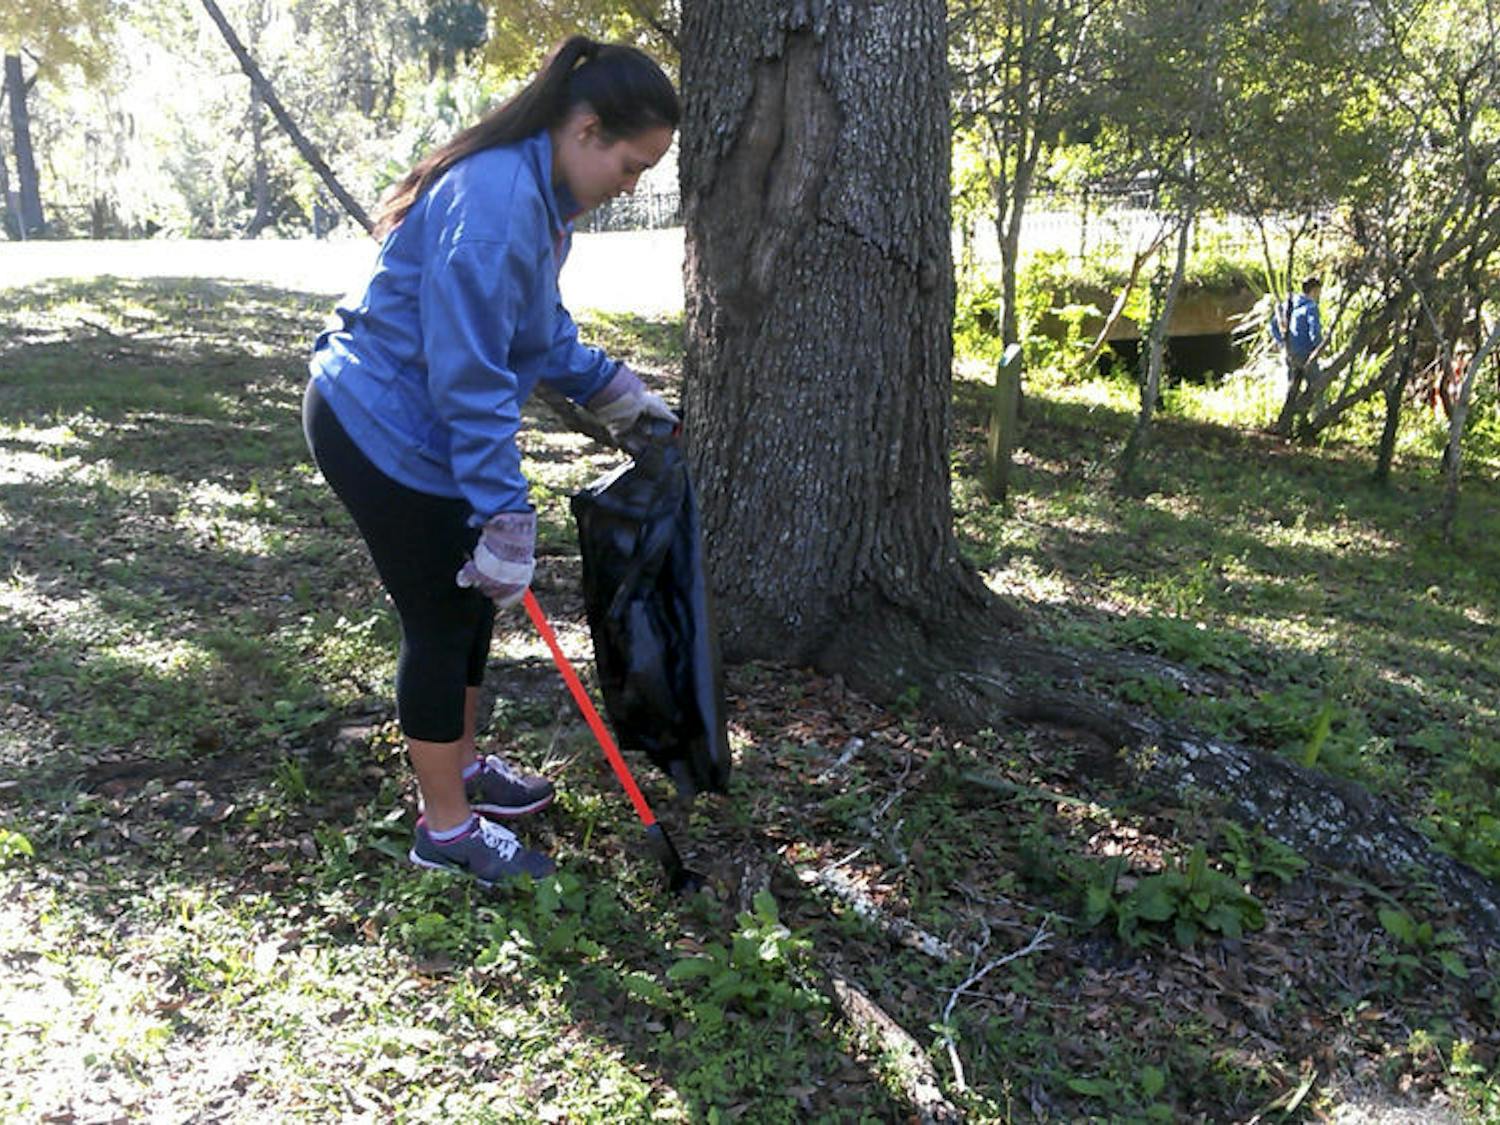 Lisette Pellot, an 18-year-old UF political science freshman is one of the site leaders for Keeping Alachua County Beautiful. “It's important for UF to celebrate this and show that we are all whole," Pellot said.